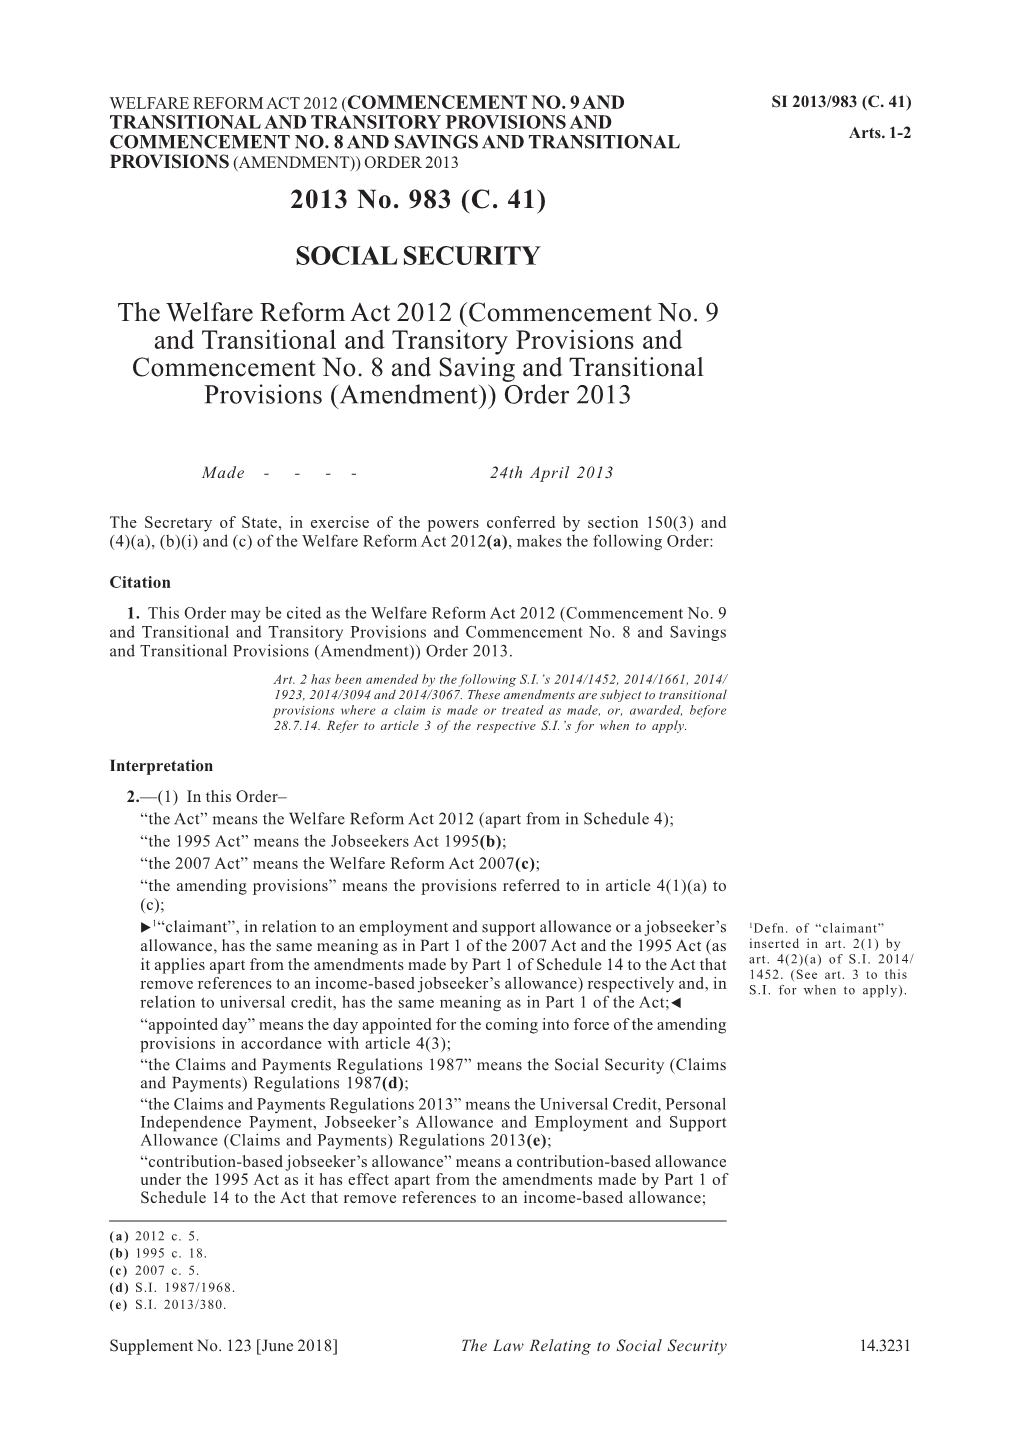 The Welfare Reform Act 2012 (Commencement No